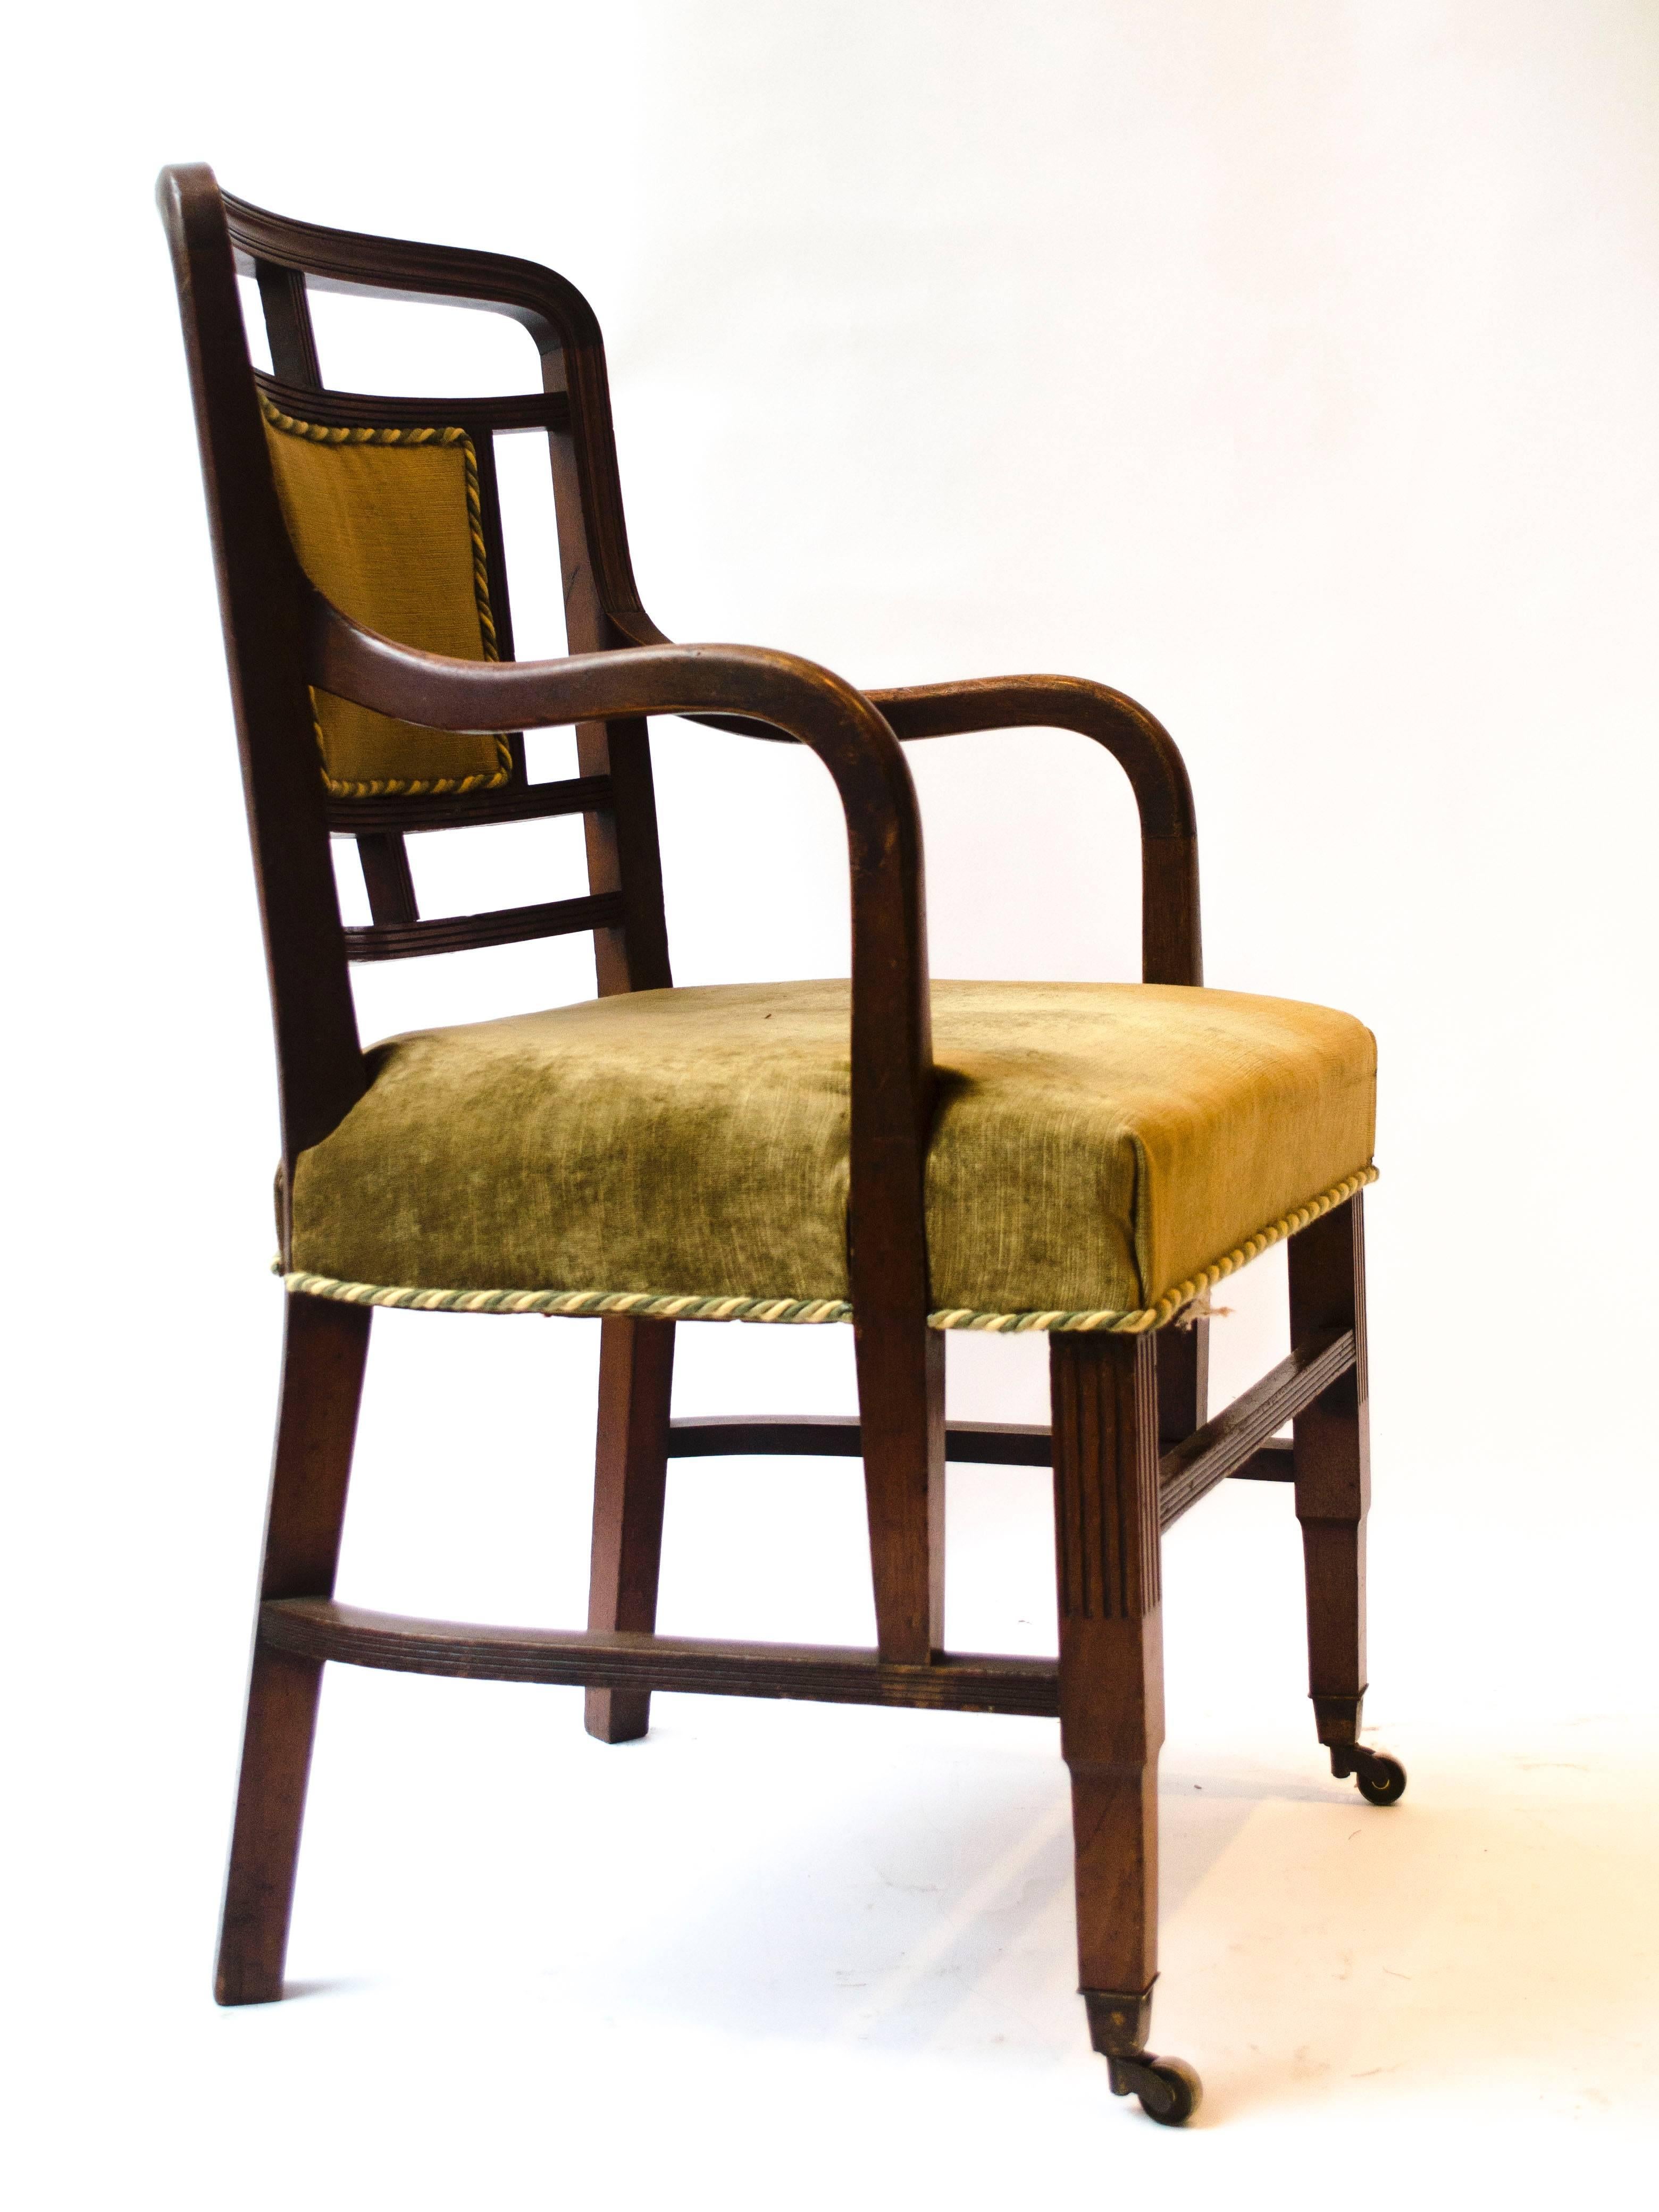 Edward William Godwin (1833-1886) for William Watt, an extremely rare Anglo-Japanese armchair, with a pad centred open curved back, downswept arms and professionally re-upholstered.
The design for this armchair was illustrated in William Watts Art